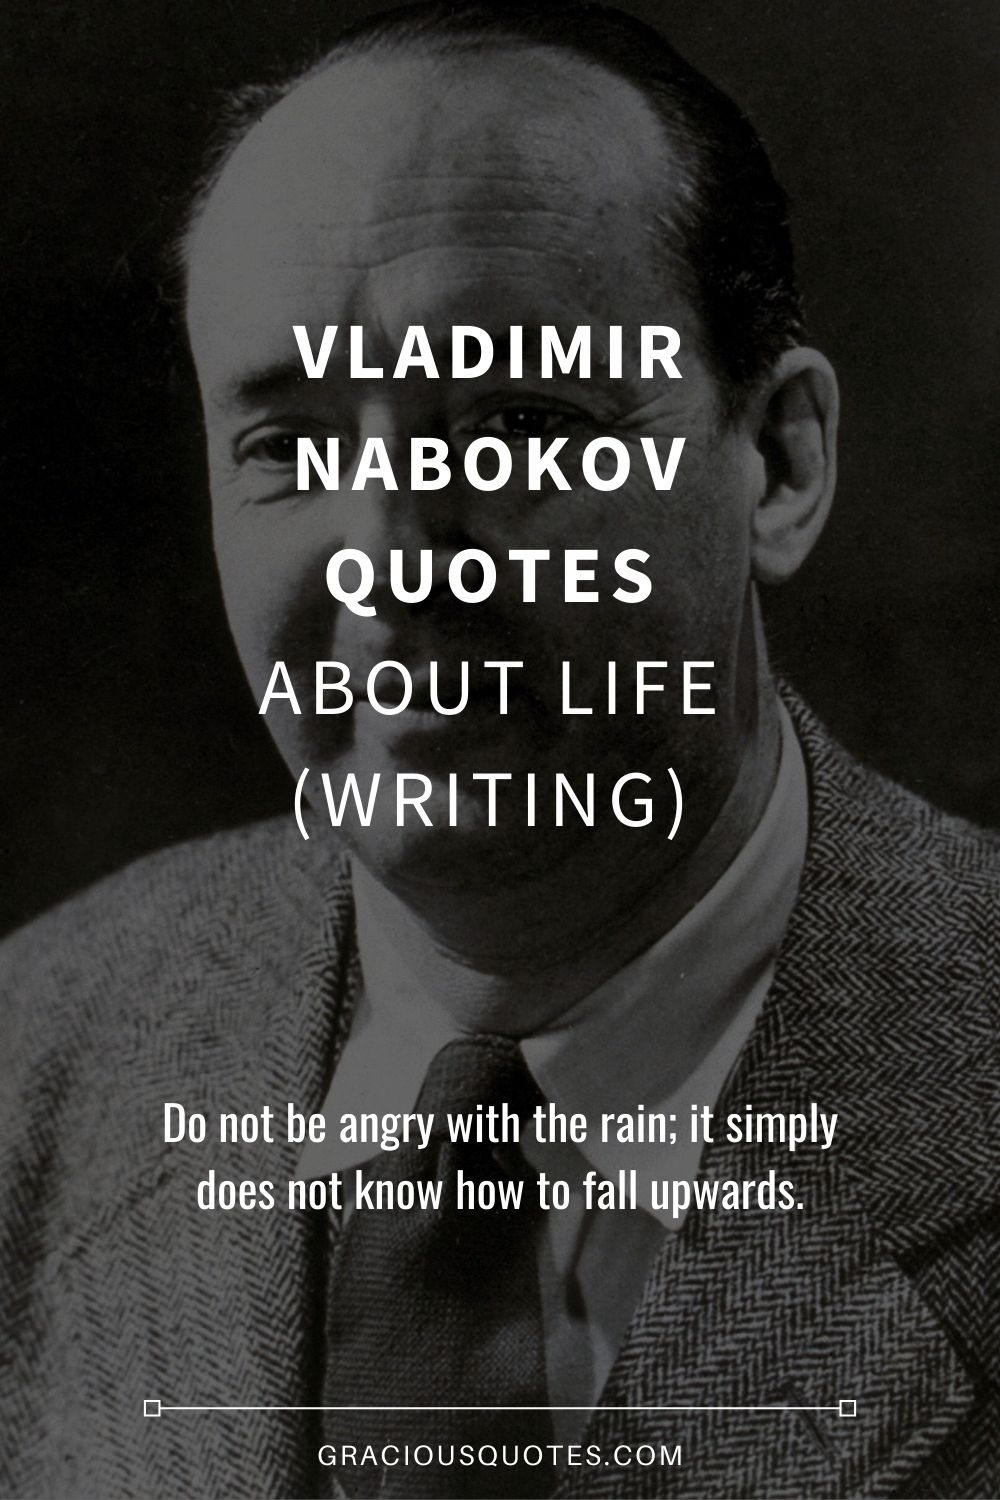 Vladimir Nabokov Quotes About Life (WRITING) - Gracious Quotes